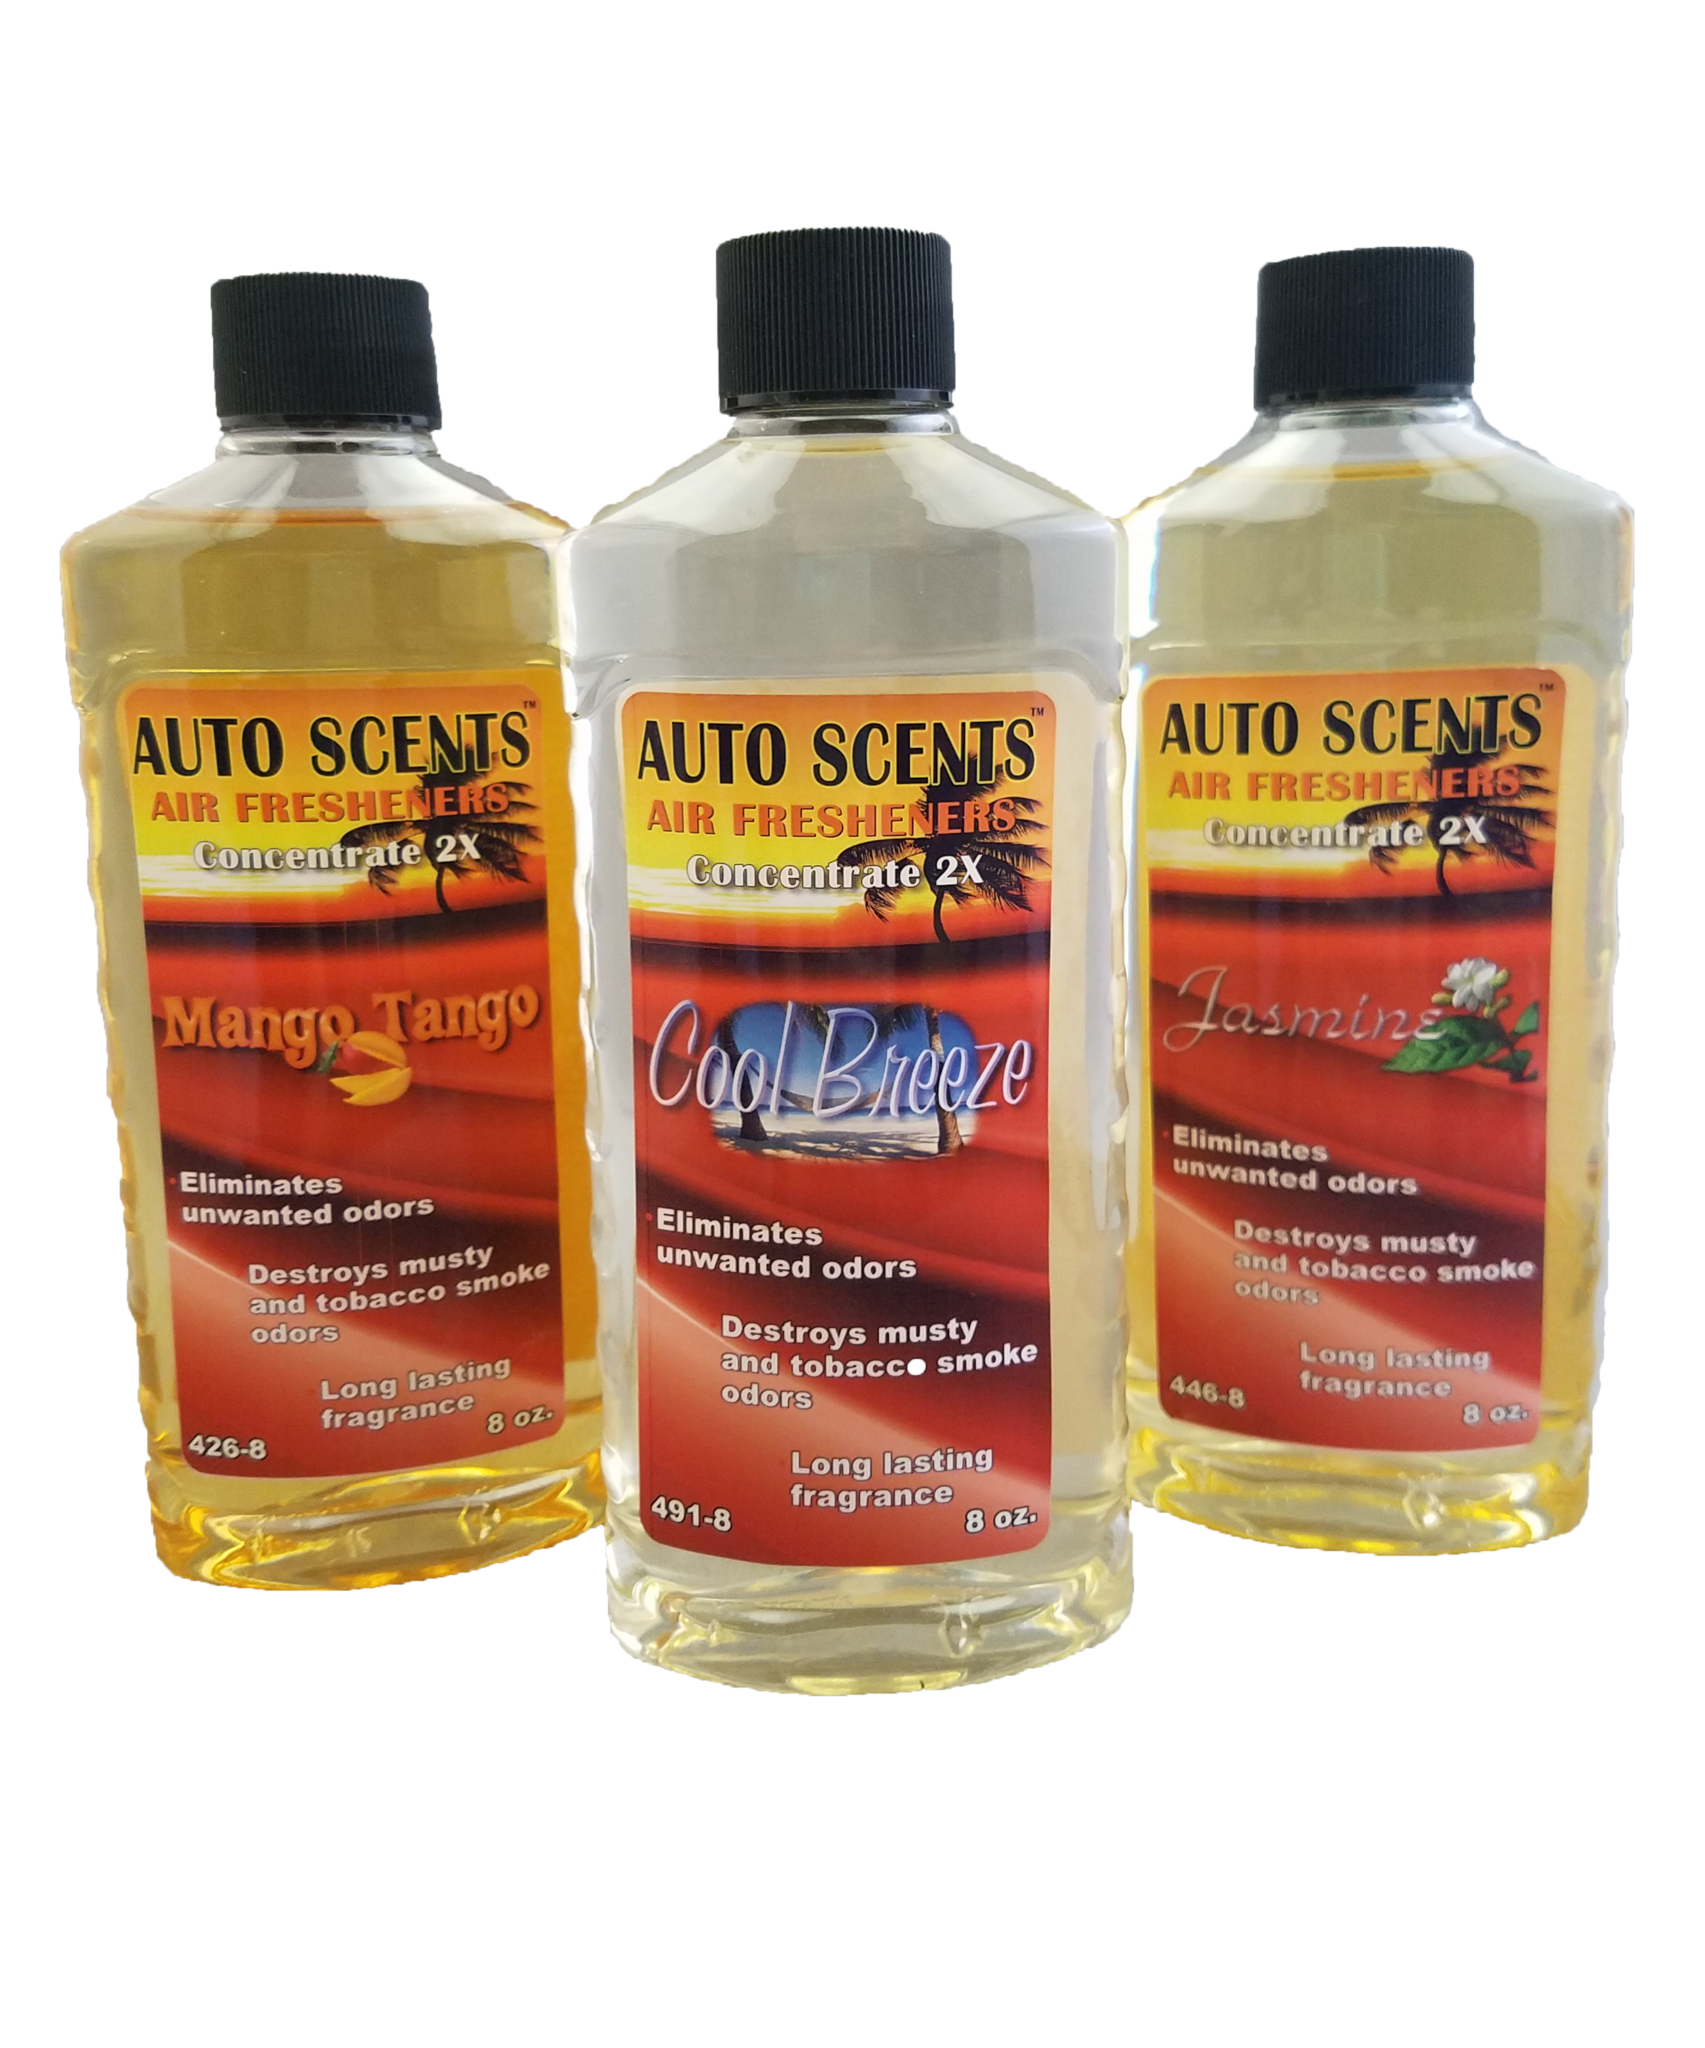 Super Concentrated Car Scent Air Freshener - Mix to Make 1 Gallon – All  American Car Care Products